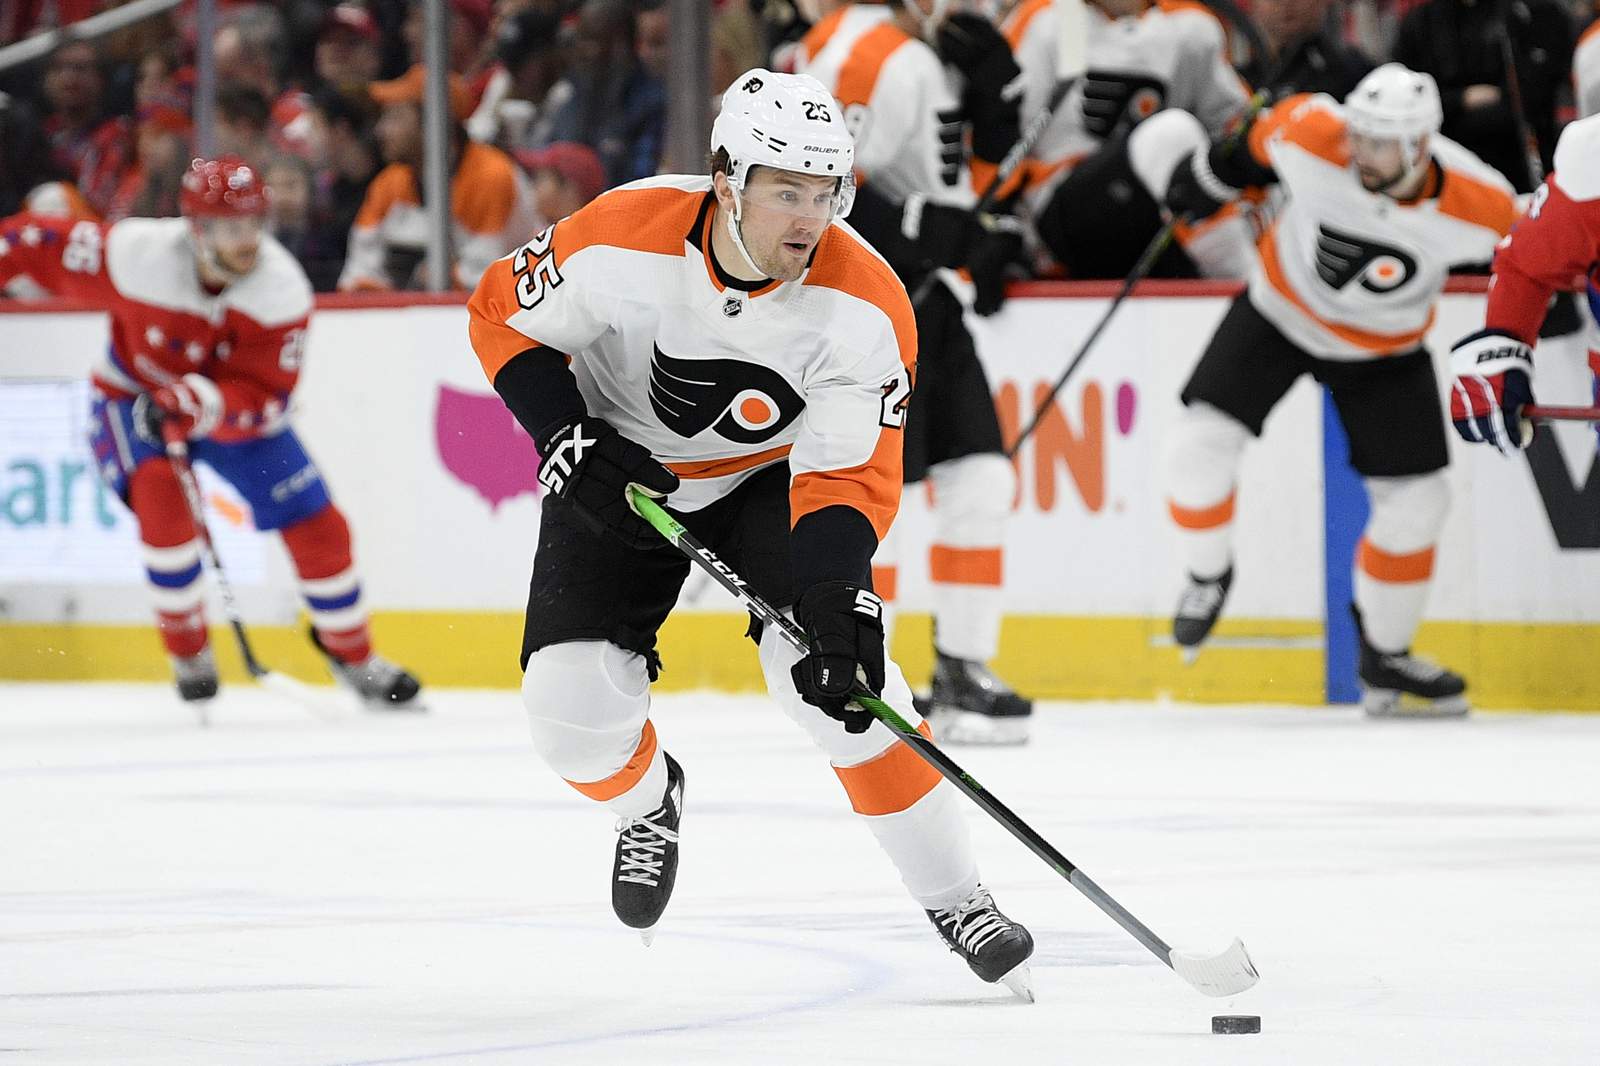 Oh, baby! Flyers' van Riemsdyk has full house with new girl